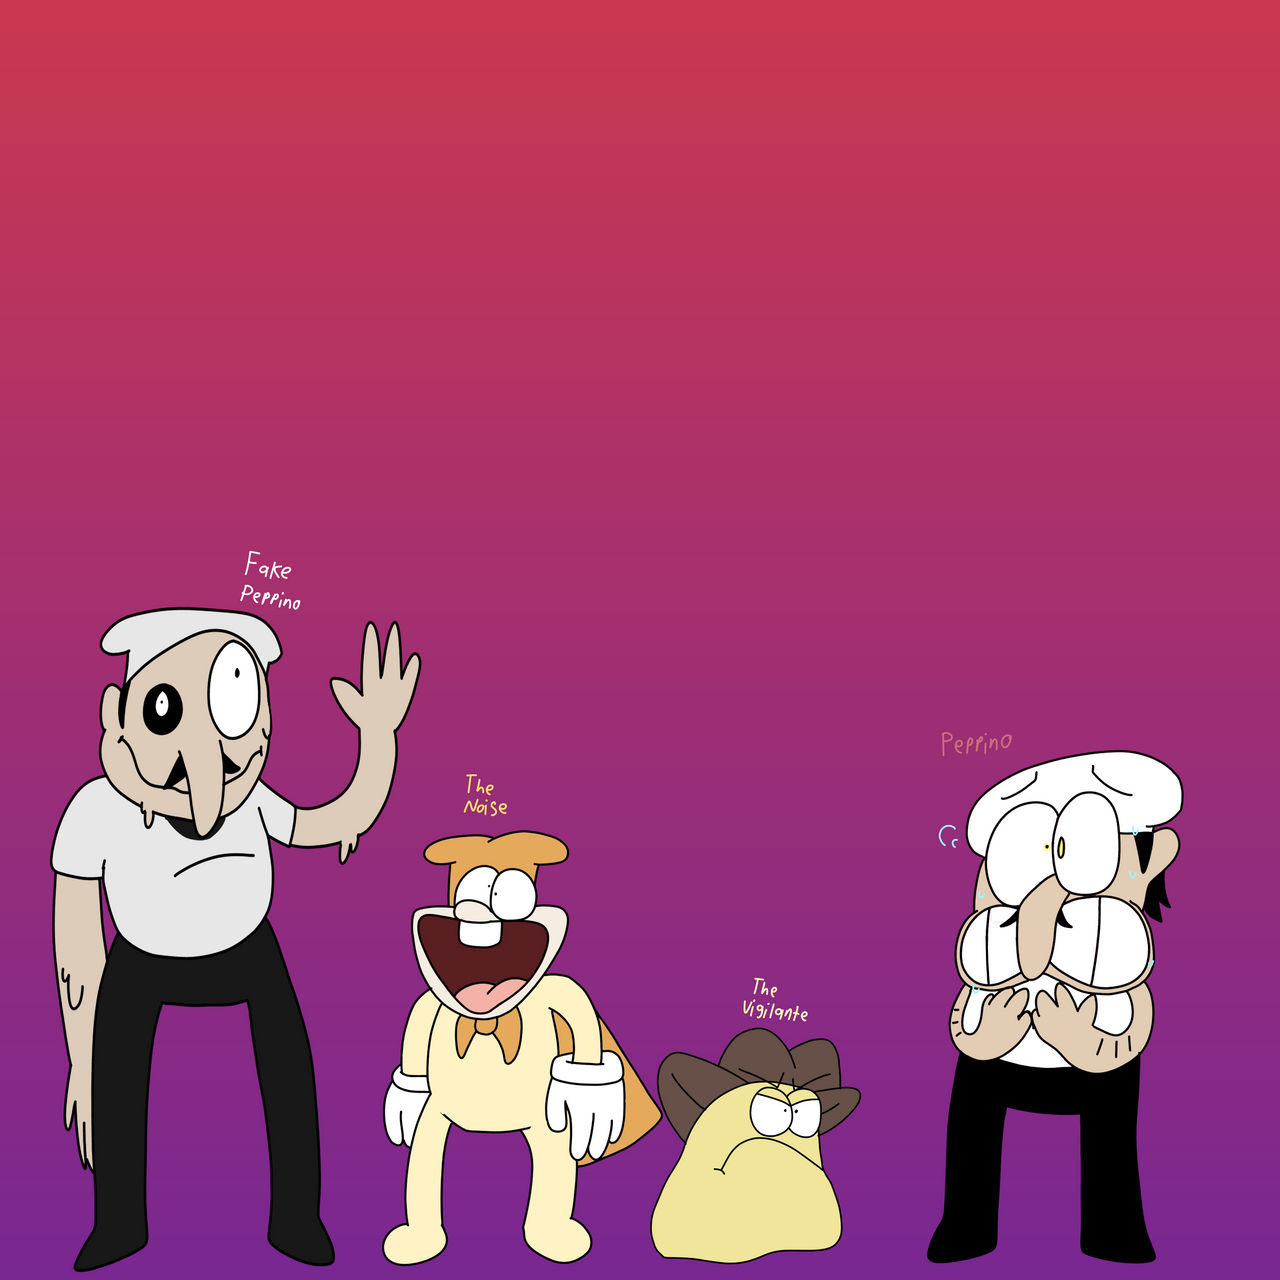 Pizza Tower characters in my style by RascalTheWeirdo on DeviantArt